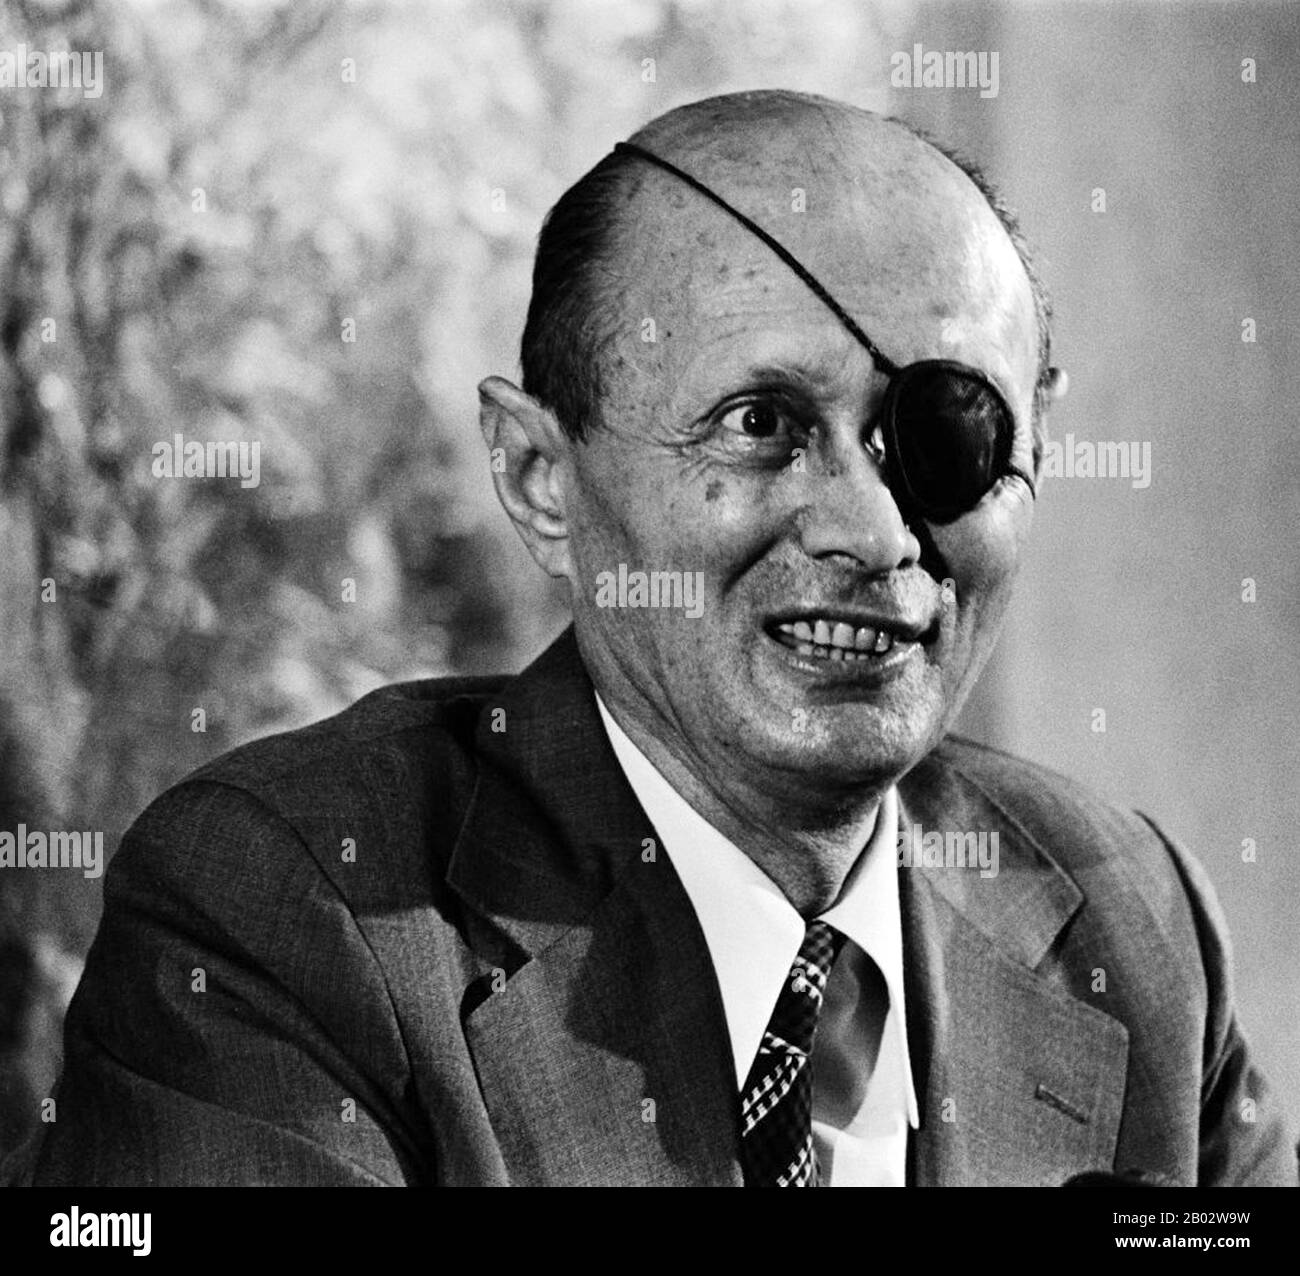 Moshe Dayan (20 May 1915 – 16 October 1981) was an Israeli military leader and politician. He was the second child born on the first kibbutz, but he moved with his family in 1921, and he grew up on a moshav (Israeli village or settlement).  As commander of the Jerusalem front in Israel's War of Independence, Chief of staff of the Israel Defense Forces (1953–58) during the 1956 Suez Crisis, but mainly as Defense Minister during the Six-Day War, he became a fighting symbol of the new state of Israel.  After being blamed for the army's lack of preparation before the outbreak of the 1973 Yom Kippu Stock Photo